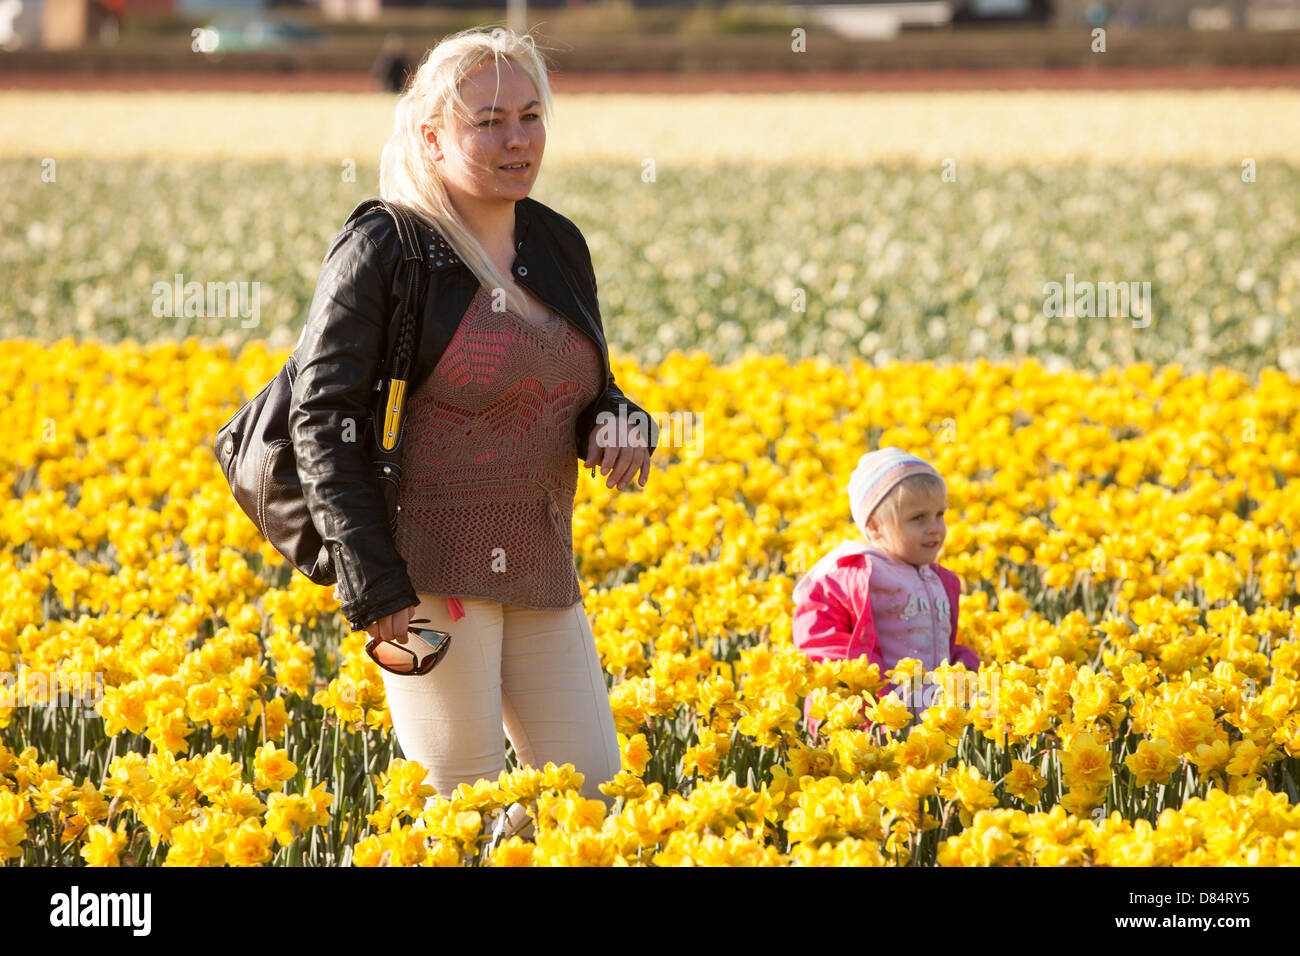 A mother and child in Daffodil fields near Keukenhof gardens, Lisse, Netherlands. Stock Photo